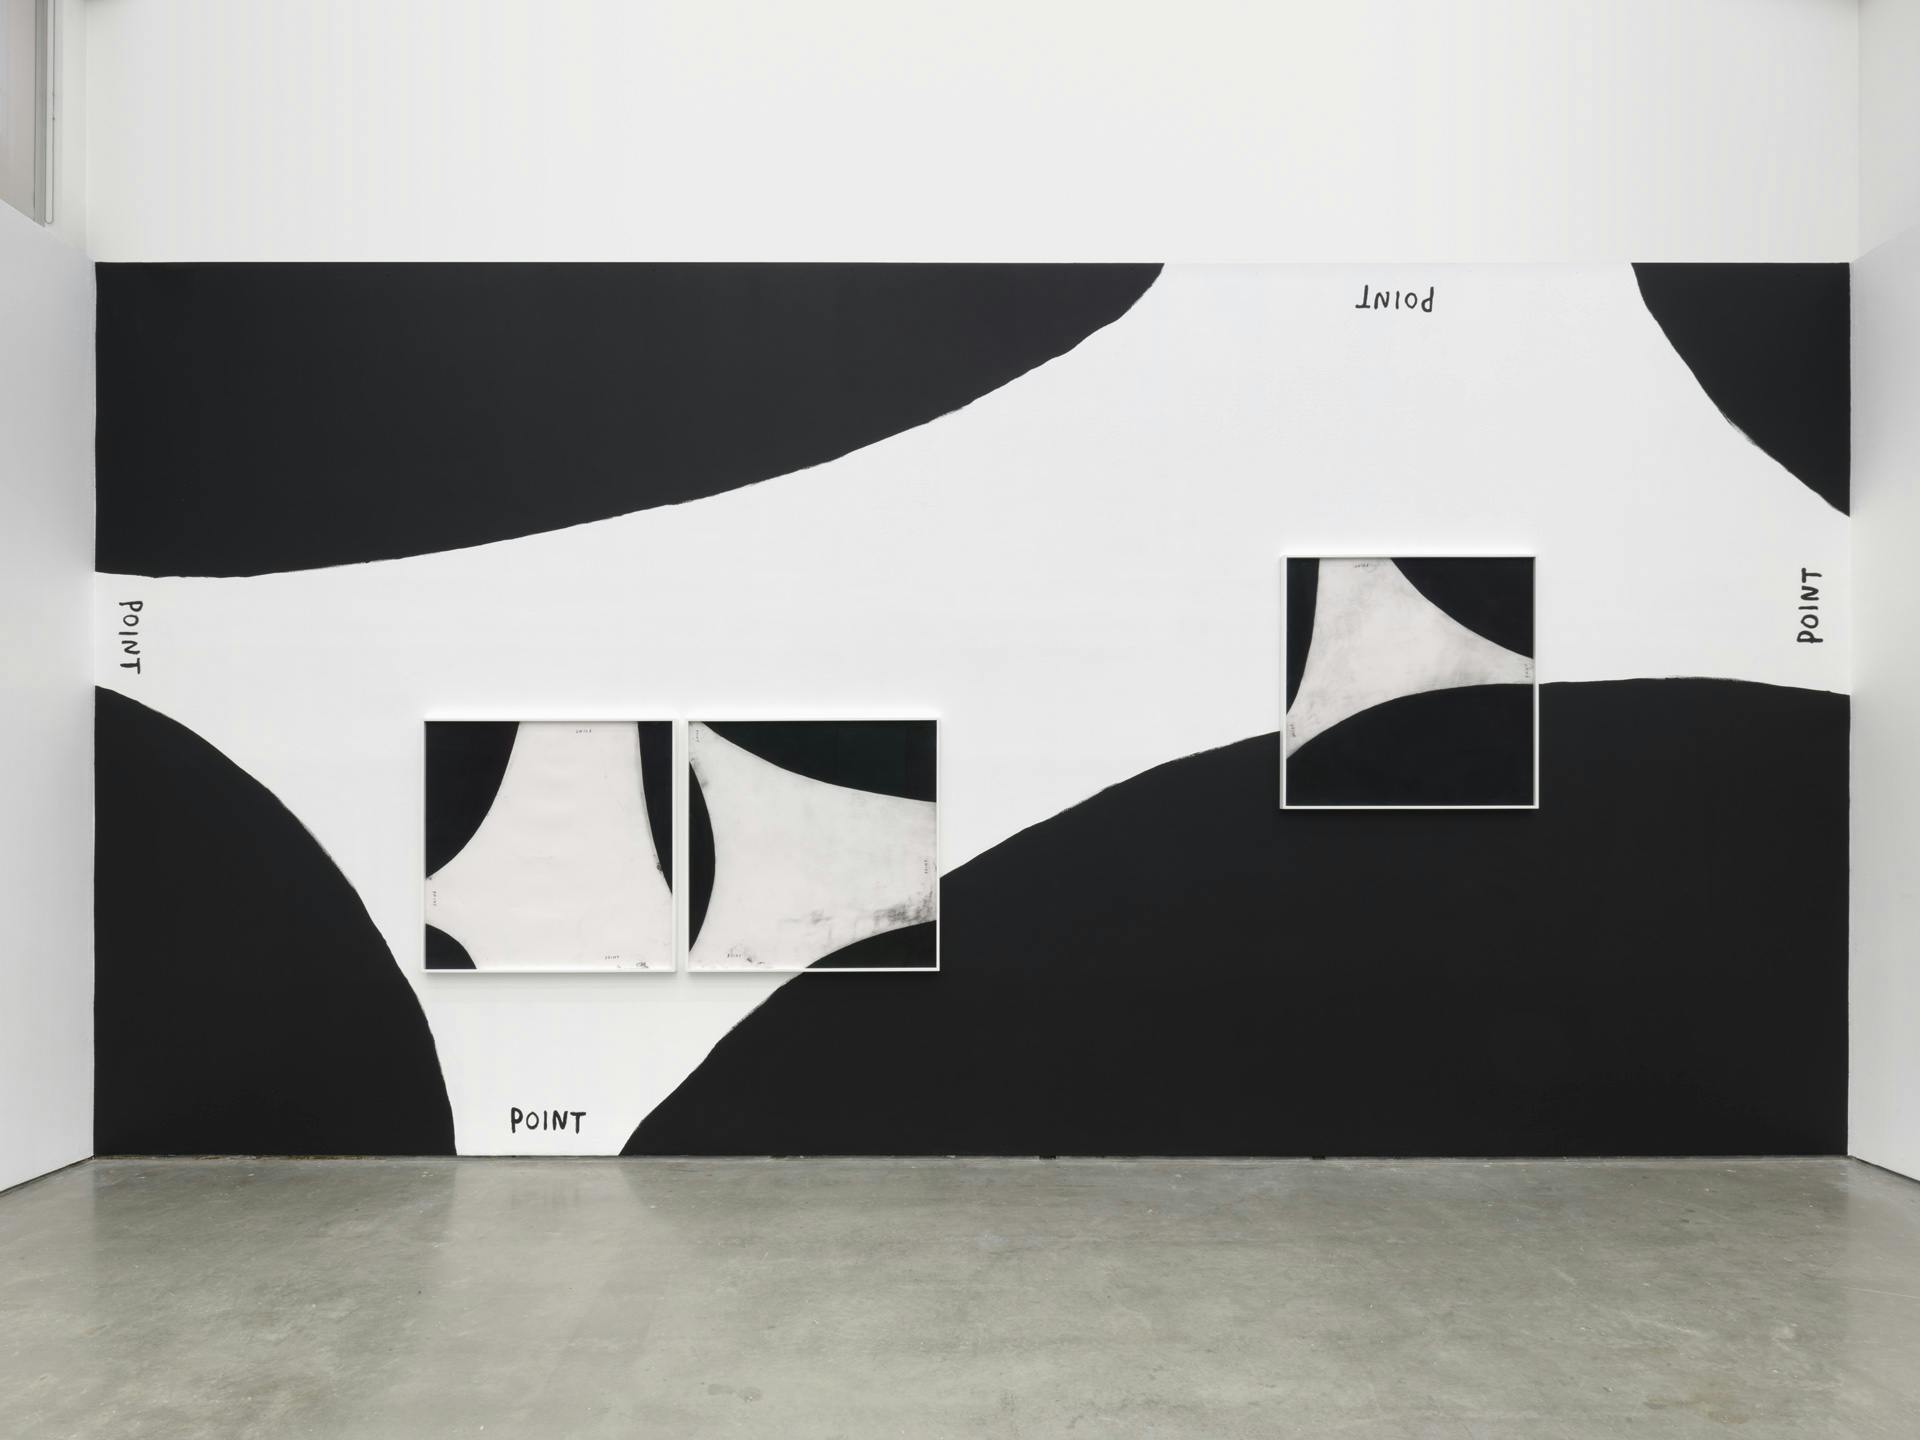 A wall drawing by Christine Sun Kim featuring the word "point" and curved black shapes on a white background, with two similar drawings by Kim hung on top of it.